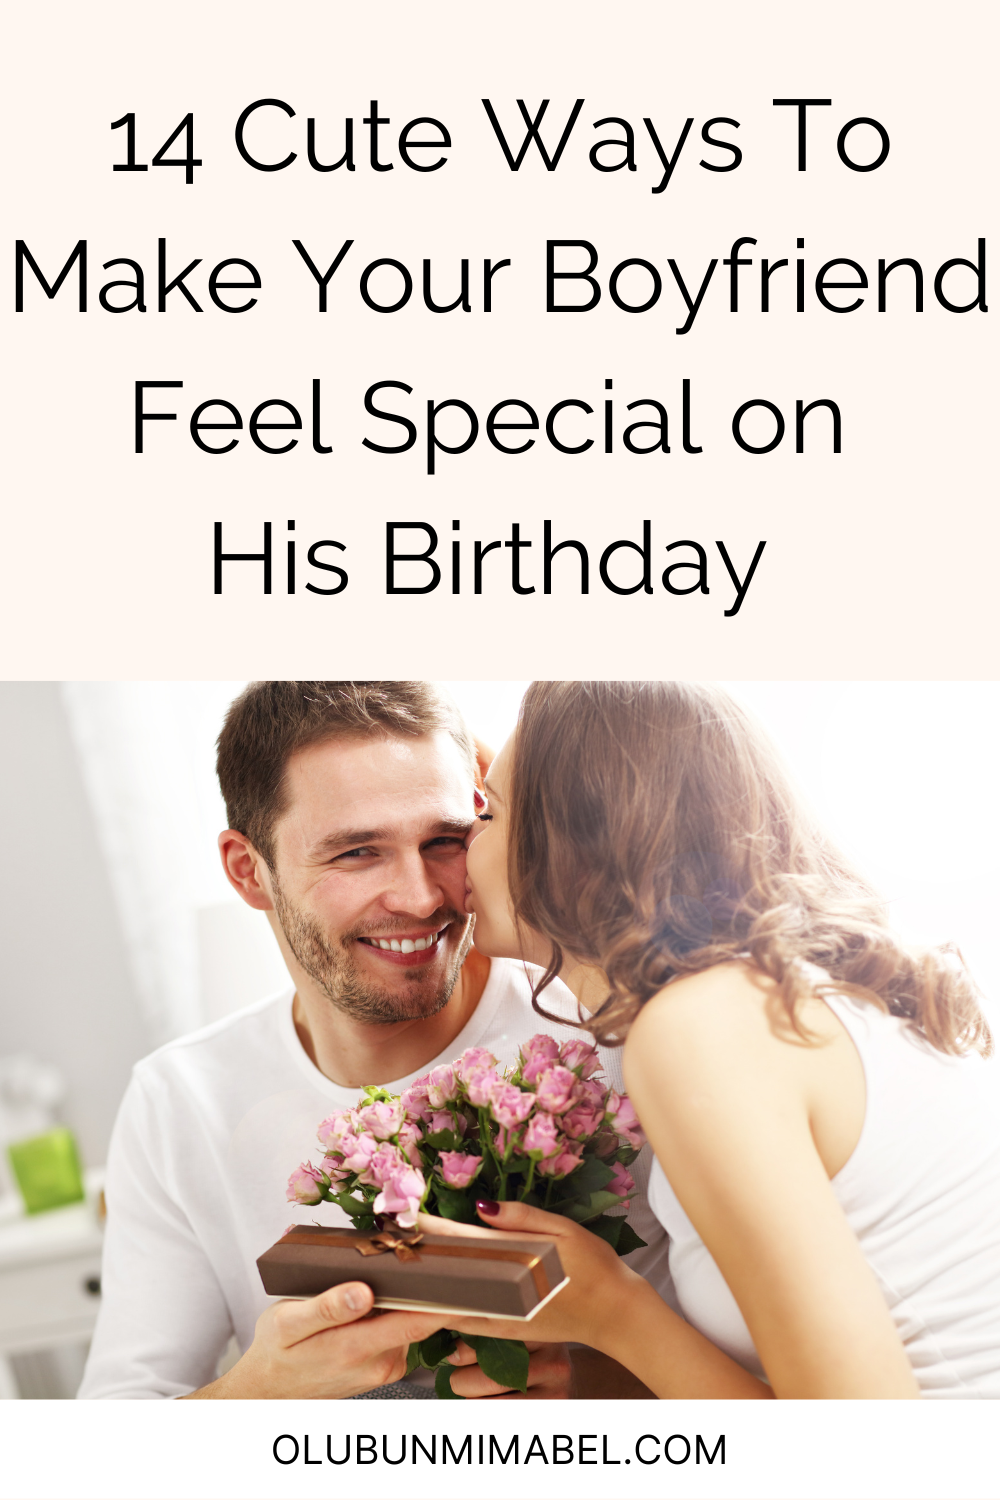 How To Make My Boyfriend Feel Special On His Birthday